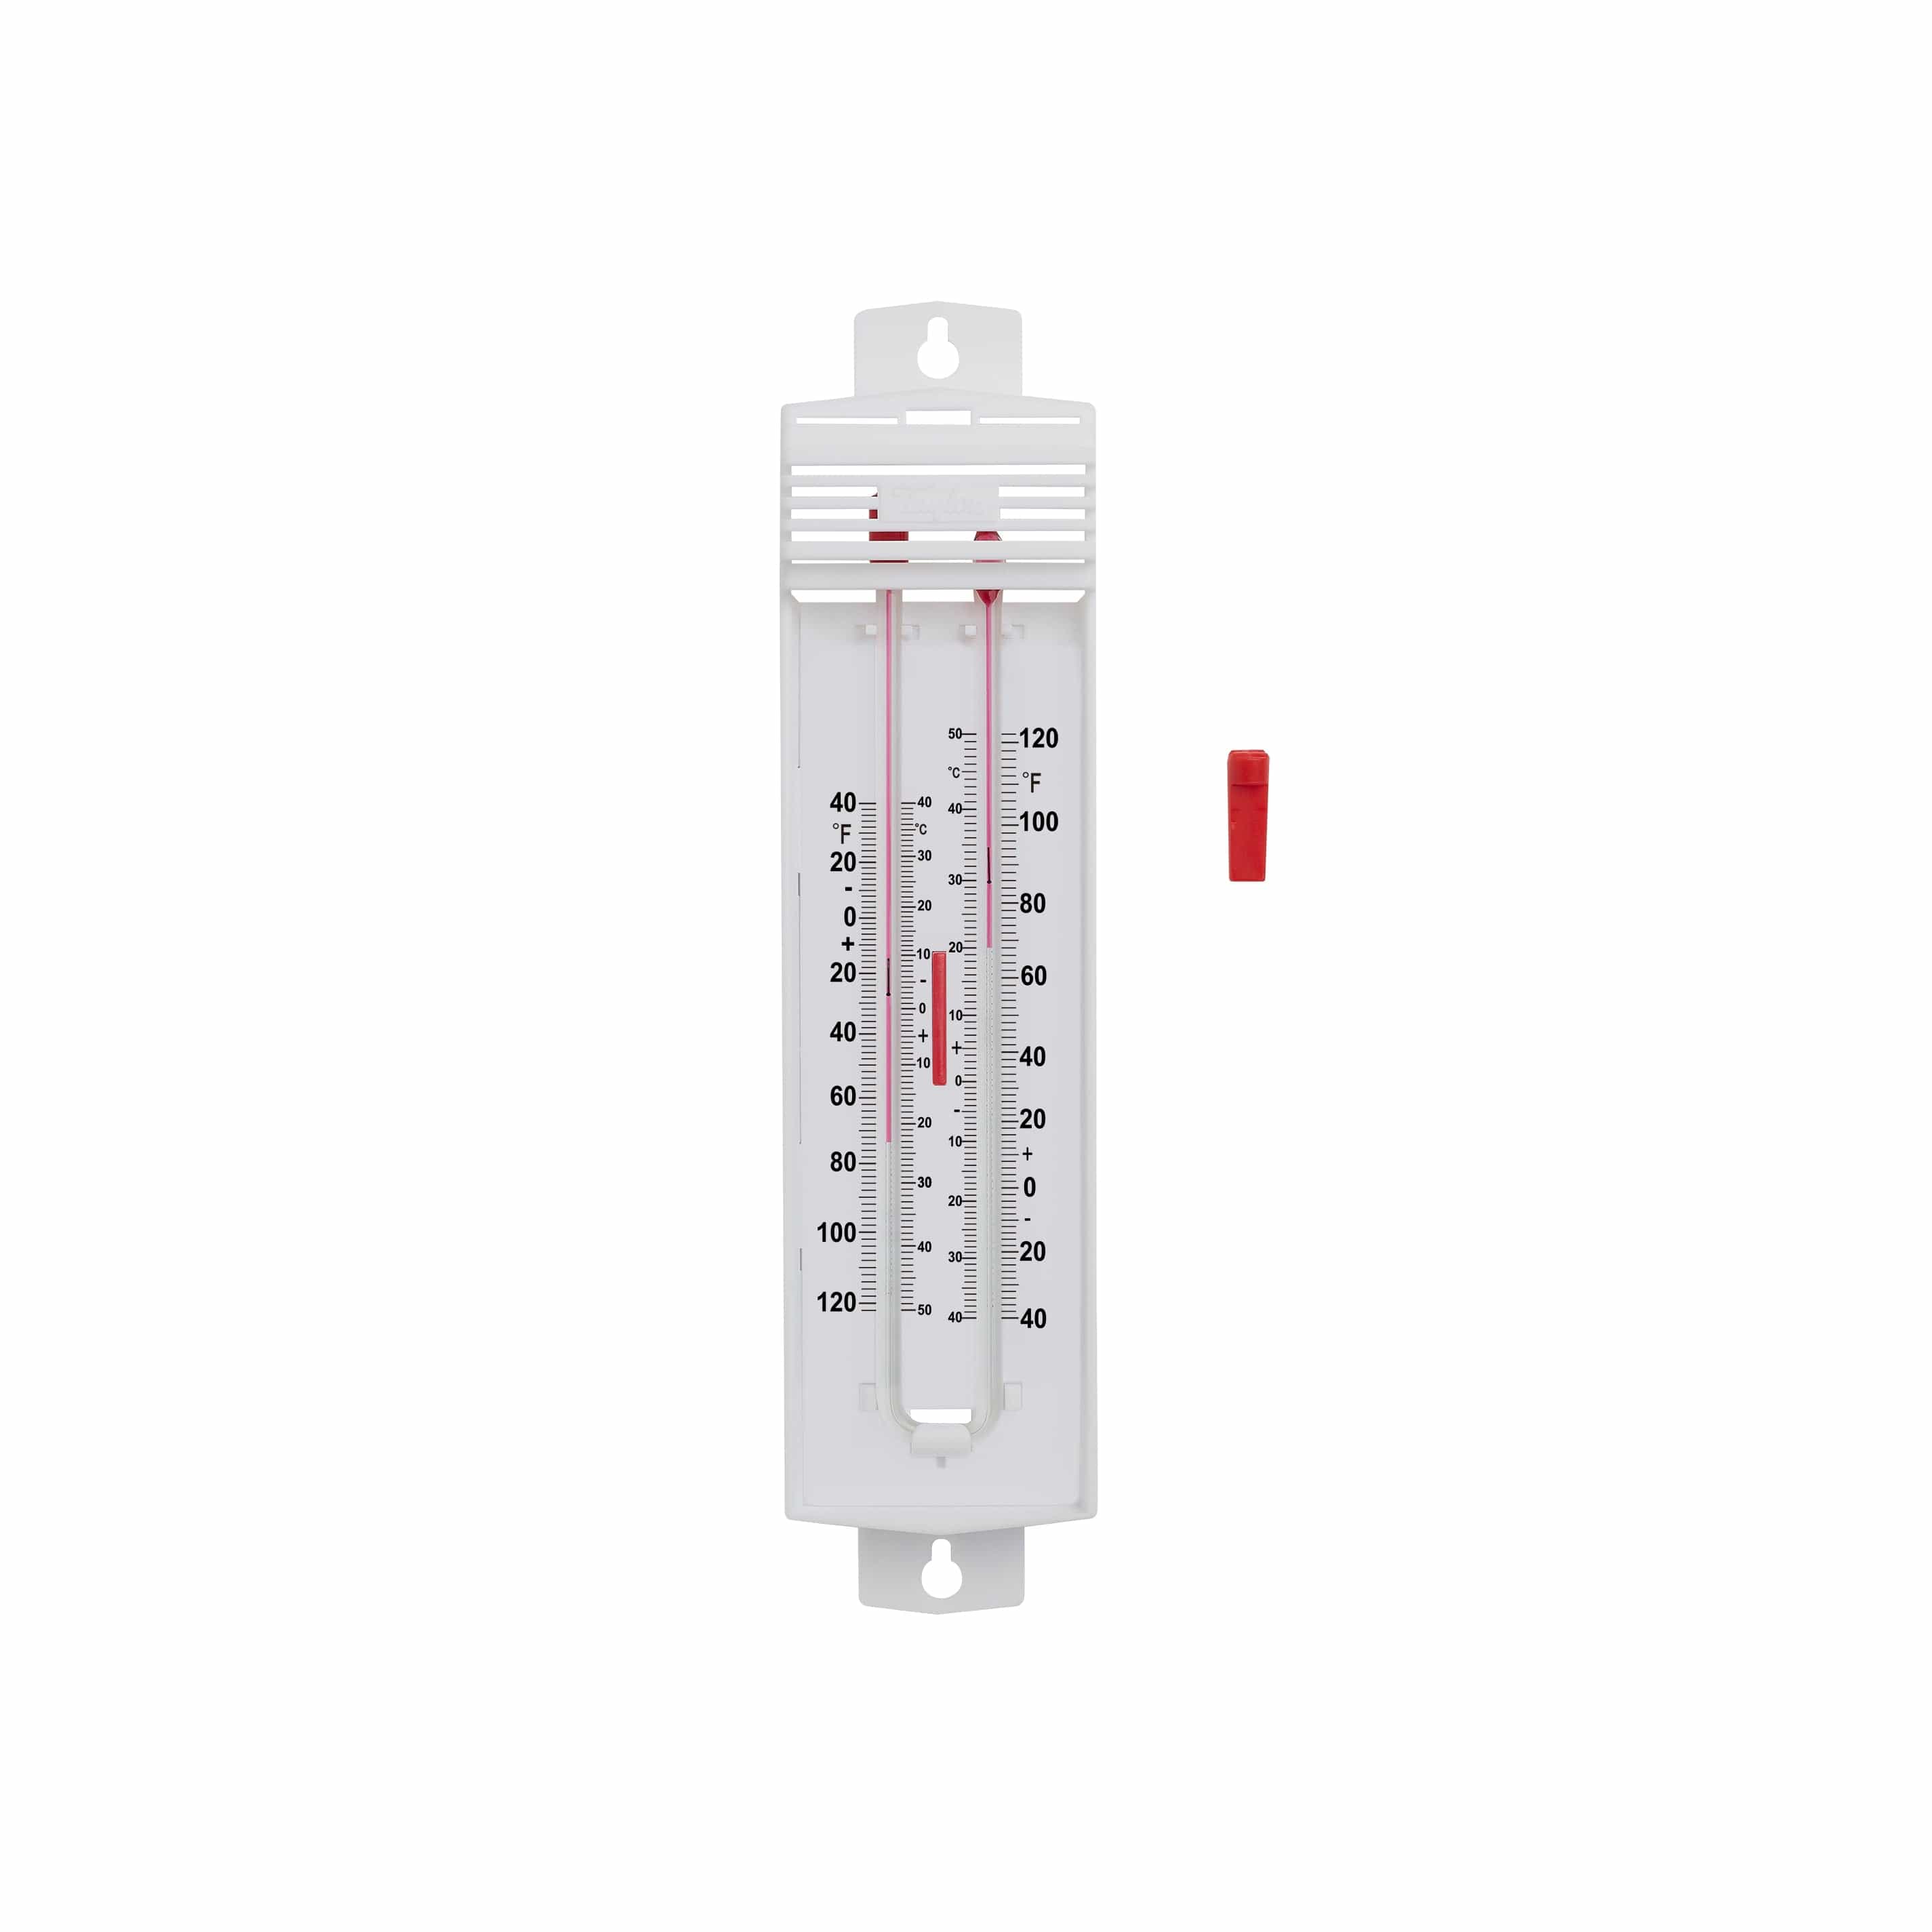 Pocket Thermometer in Plastic Case – Taylor USA